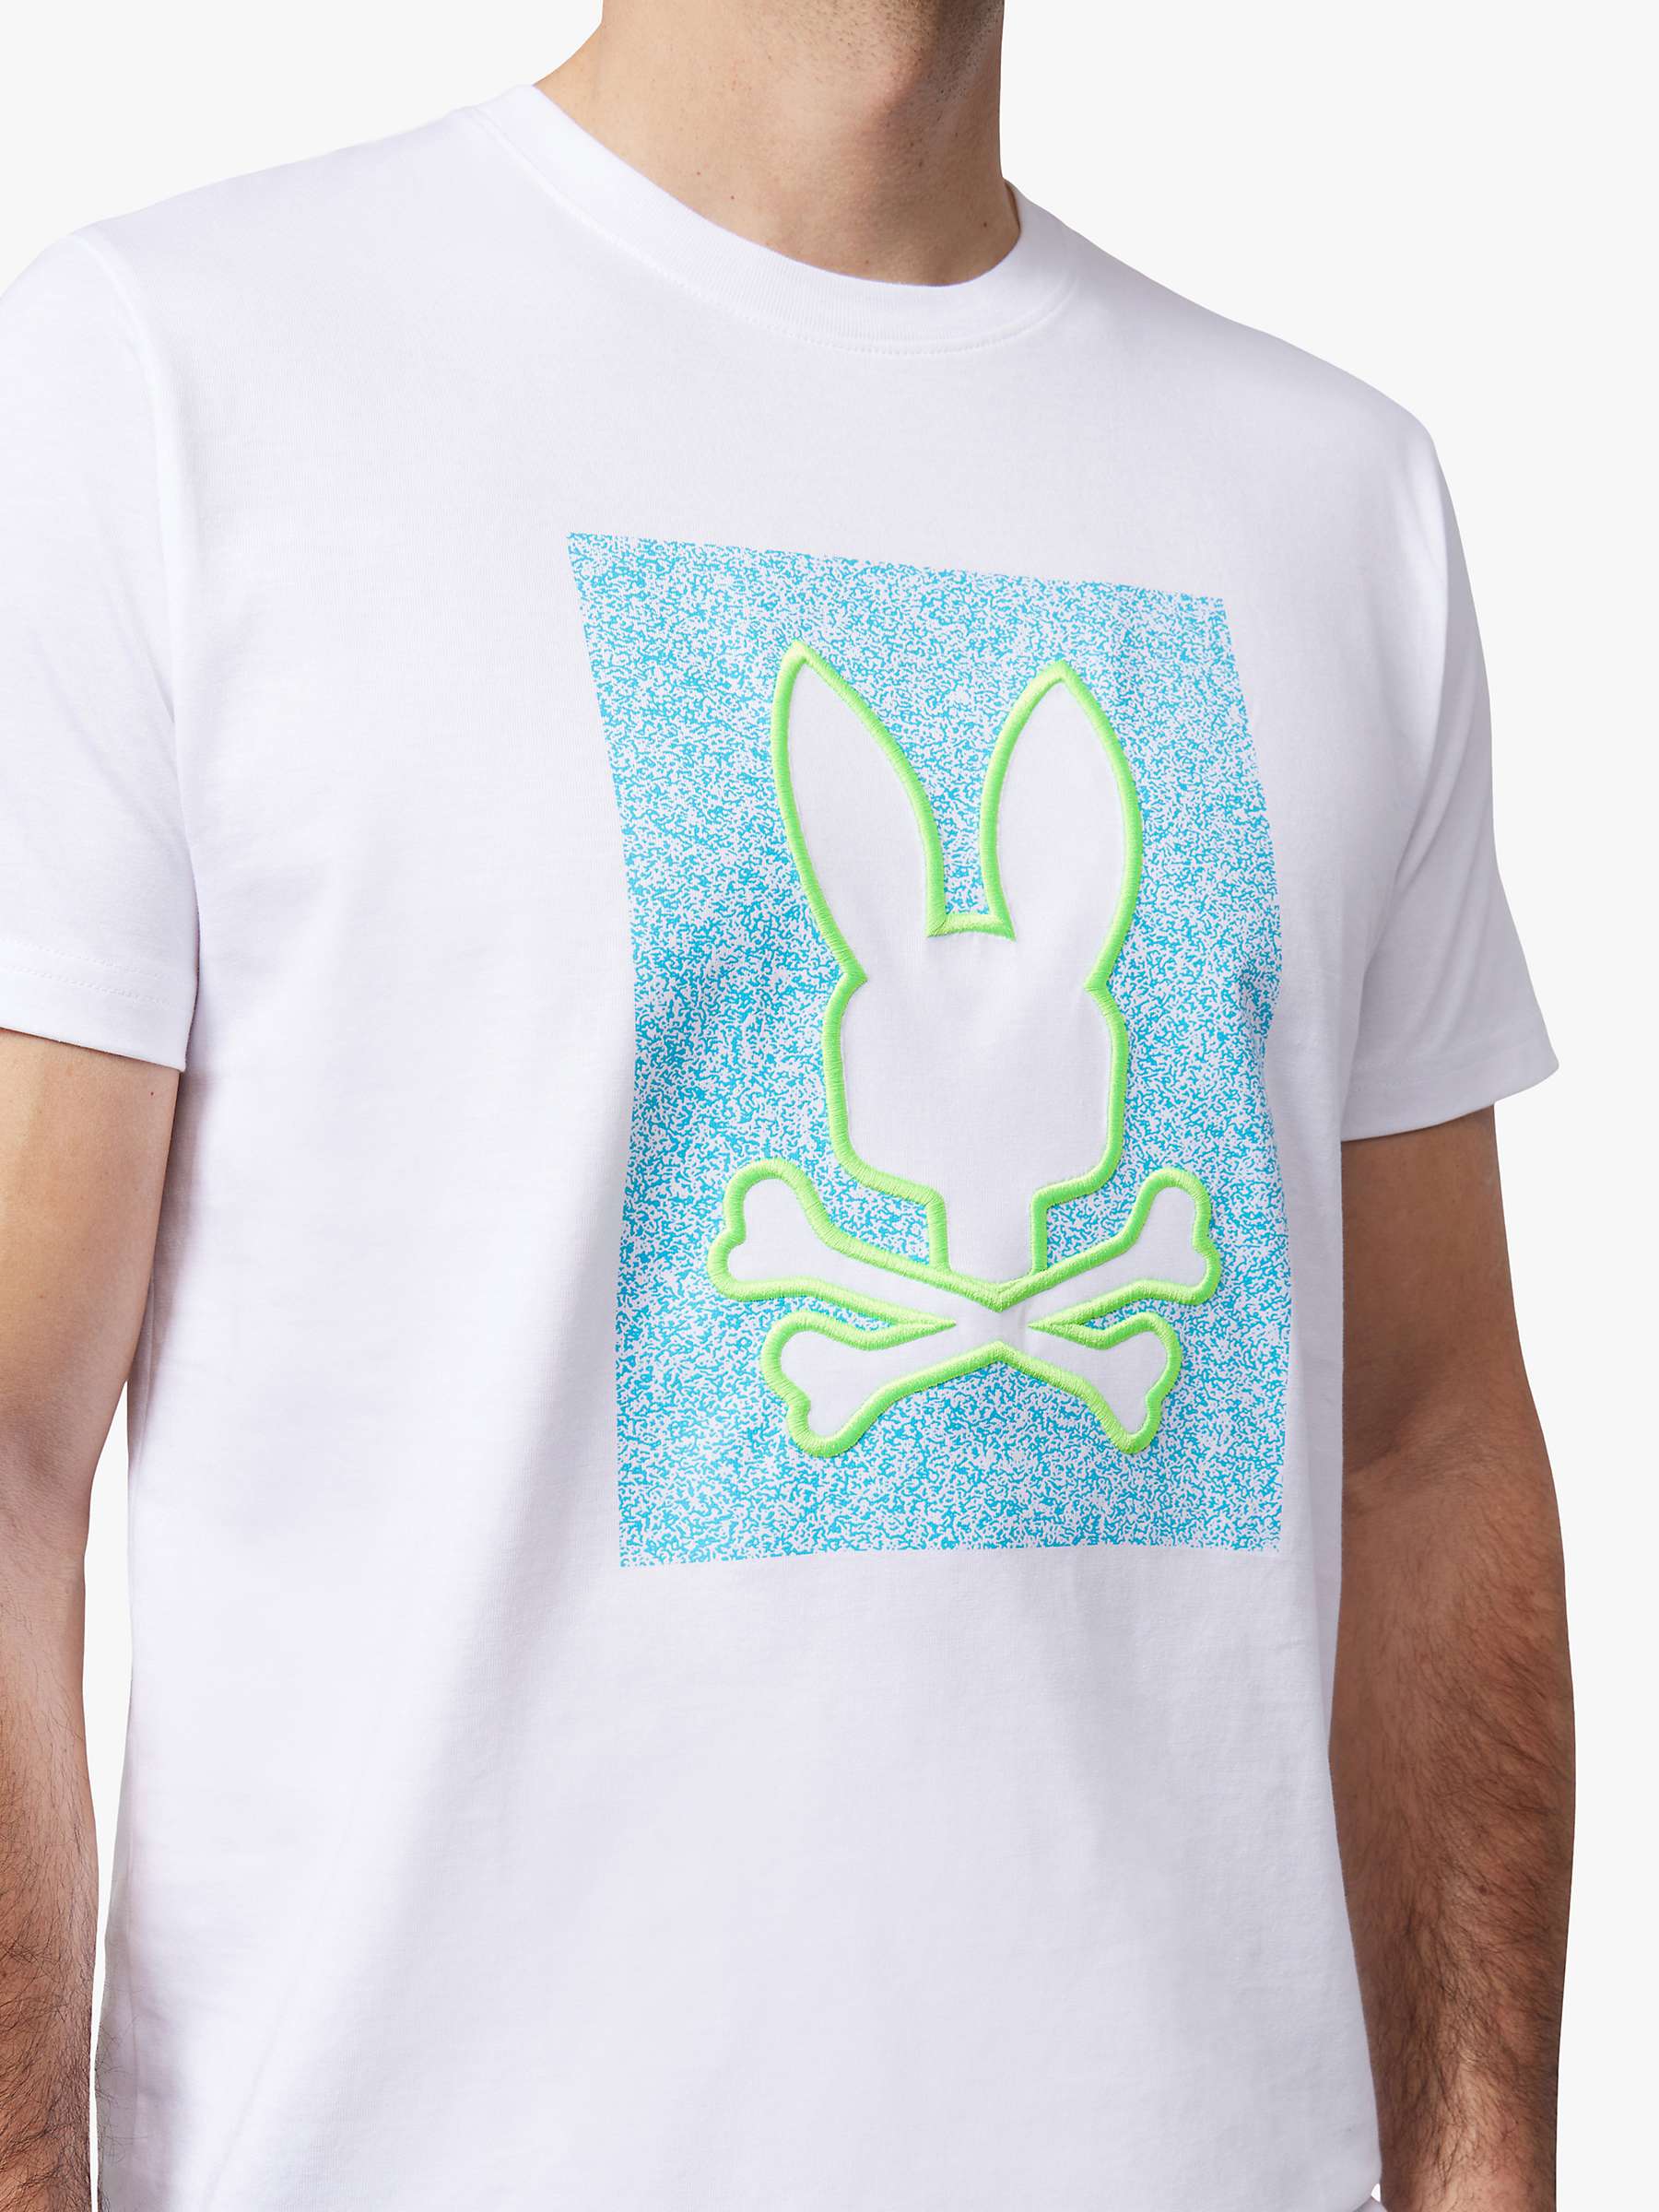 Buy Psycho Bunny Livingston Graphic T-Shirt Online at johnlewis.com